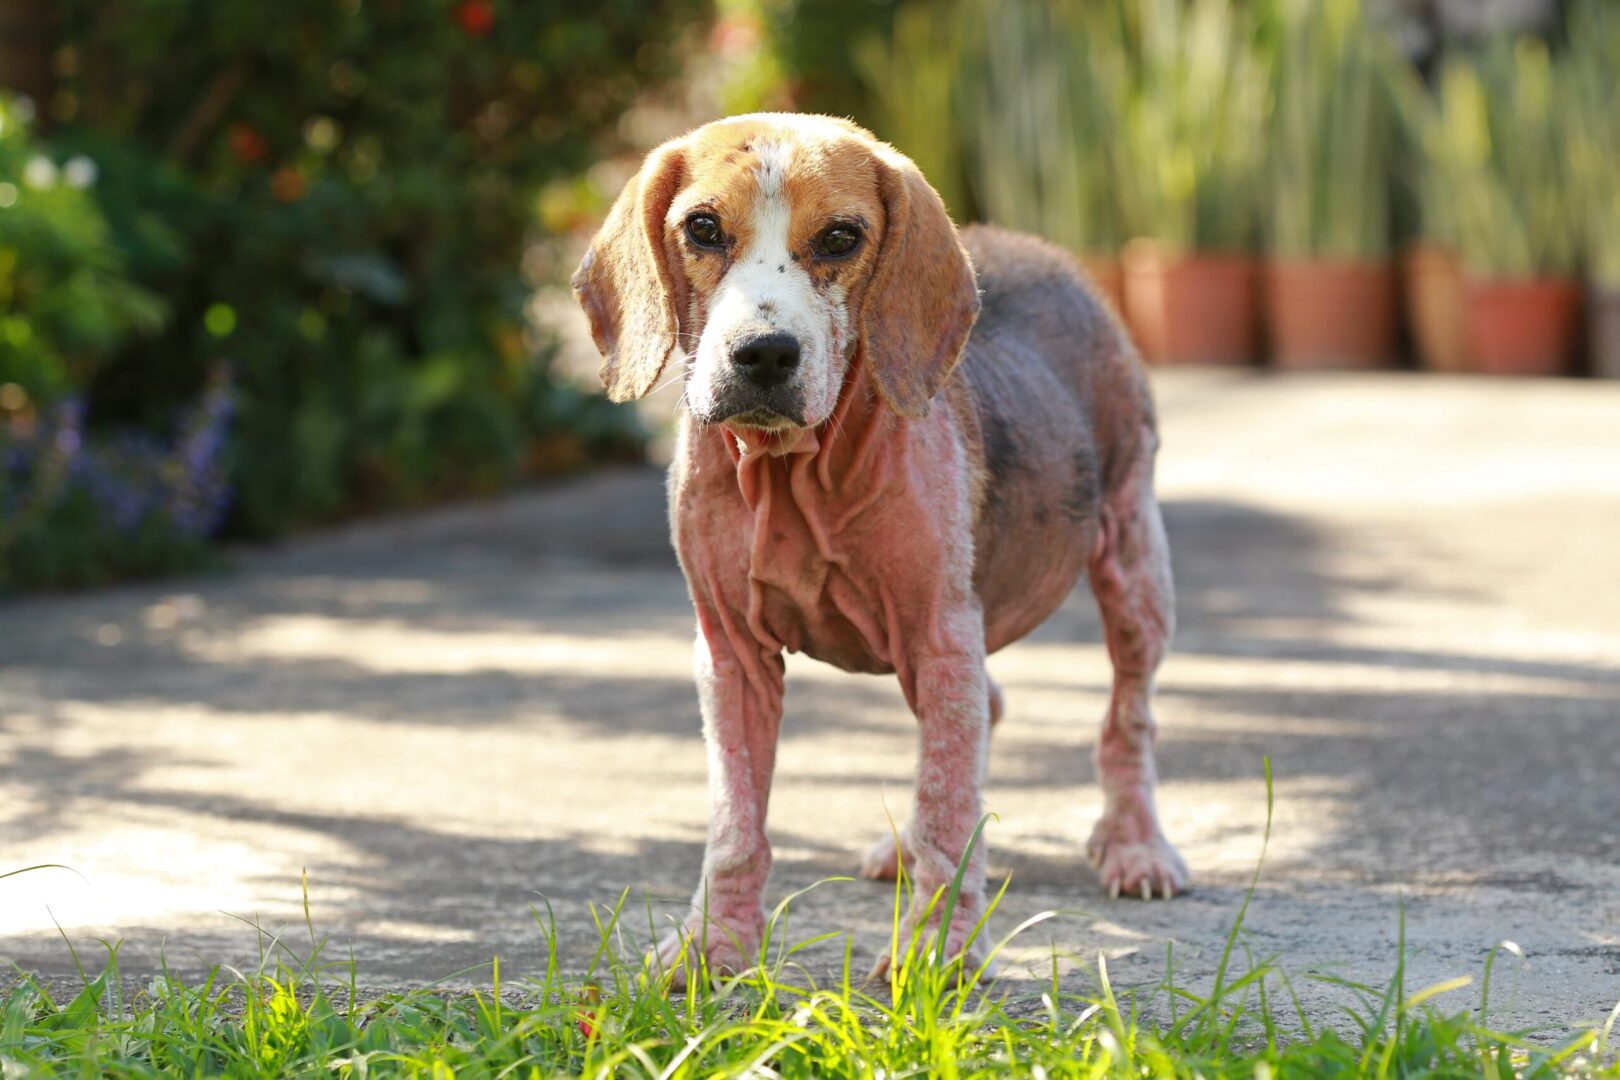 Demodicosis in Dogs